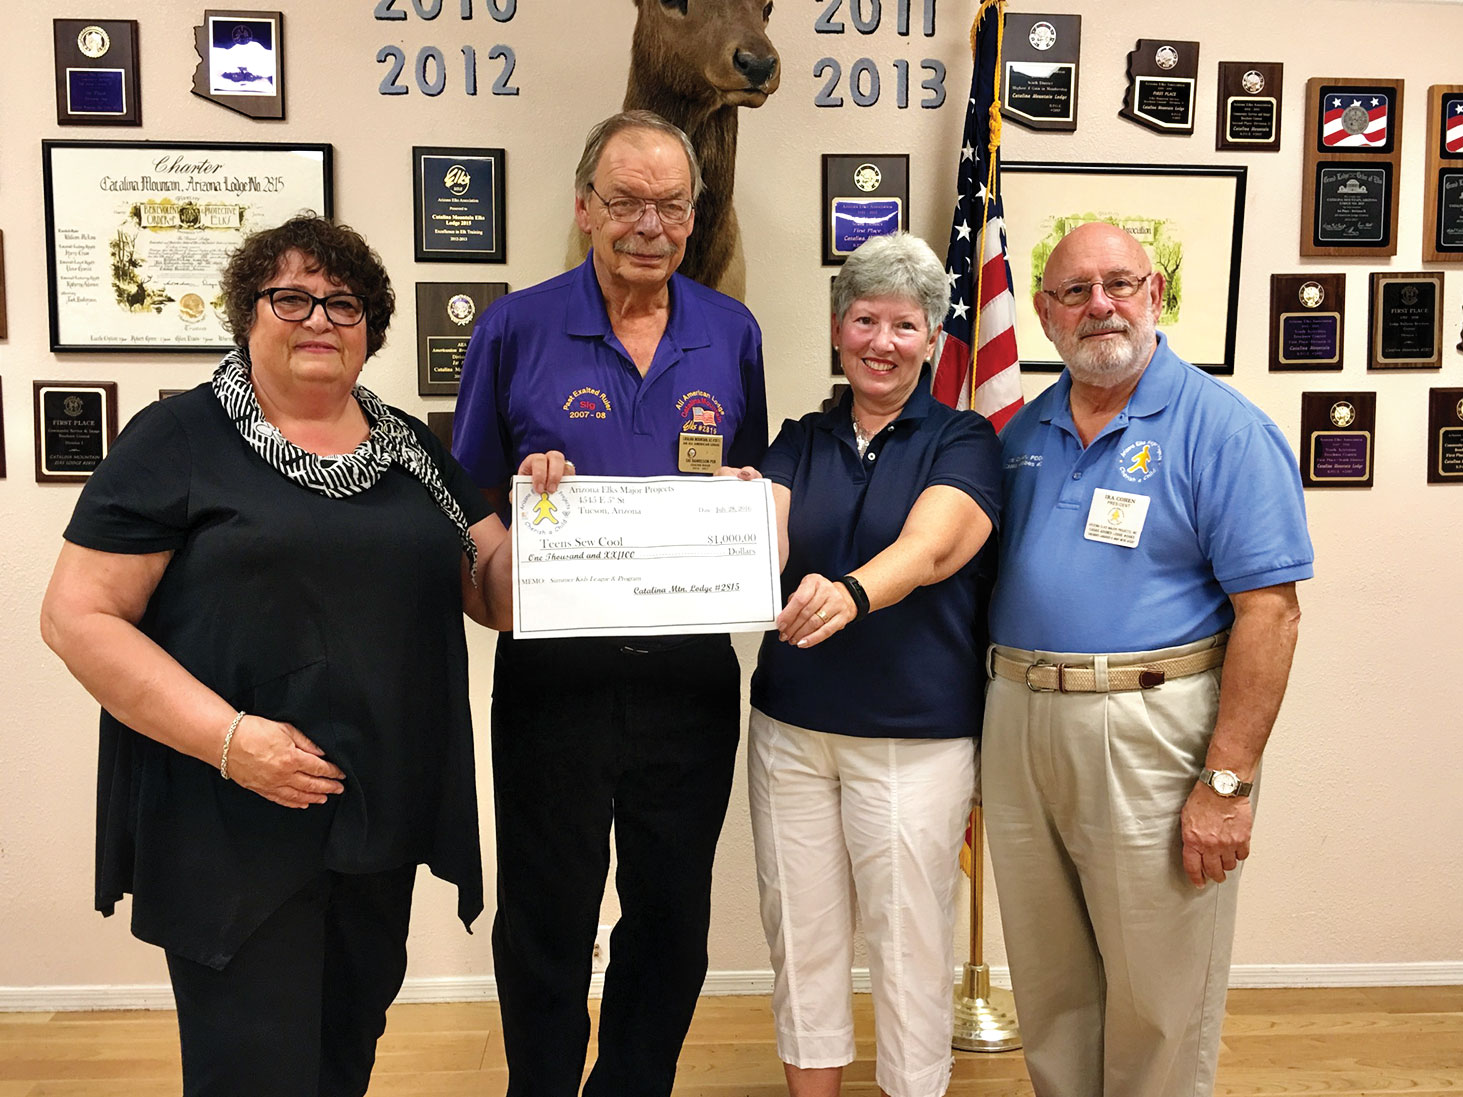 Sig Danielson, Exalted Ruler of the Catalina Mountain Elks Lodge No. 2815 and Ira Cohen, Arizona Elks Major Projects Coordinator present a check for $1,000 to Teens Sew Cool President Linda Shannon-Hills and Executive Liaison Kathleen Morgan Squires.